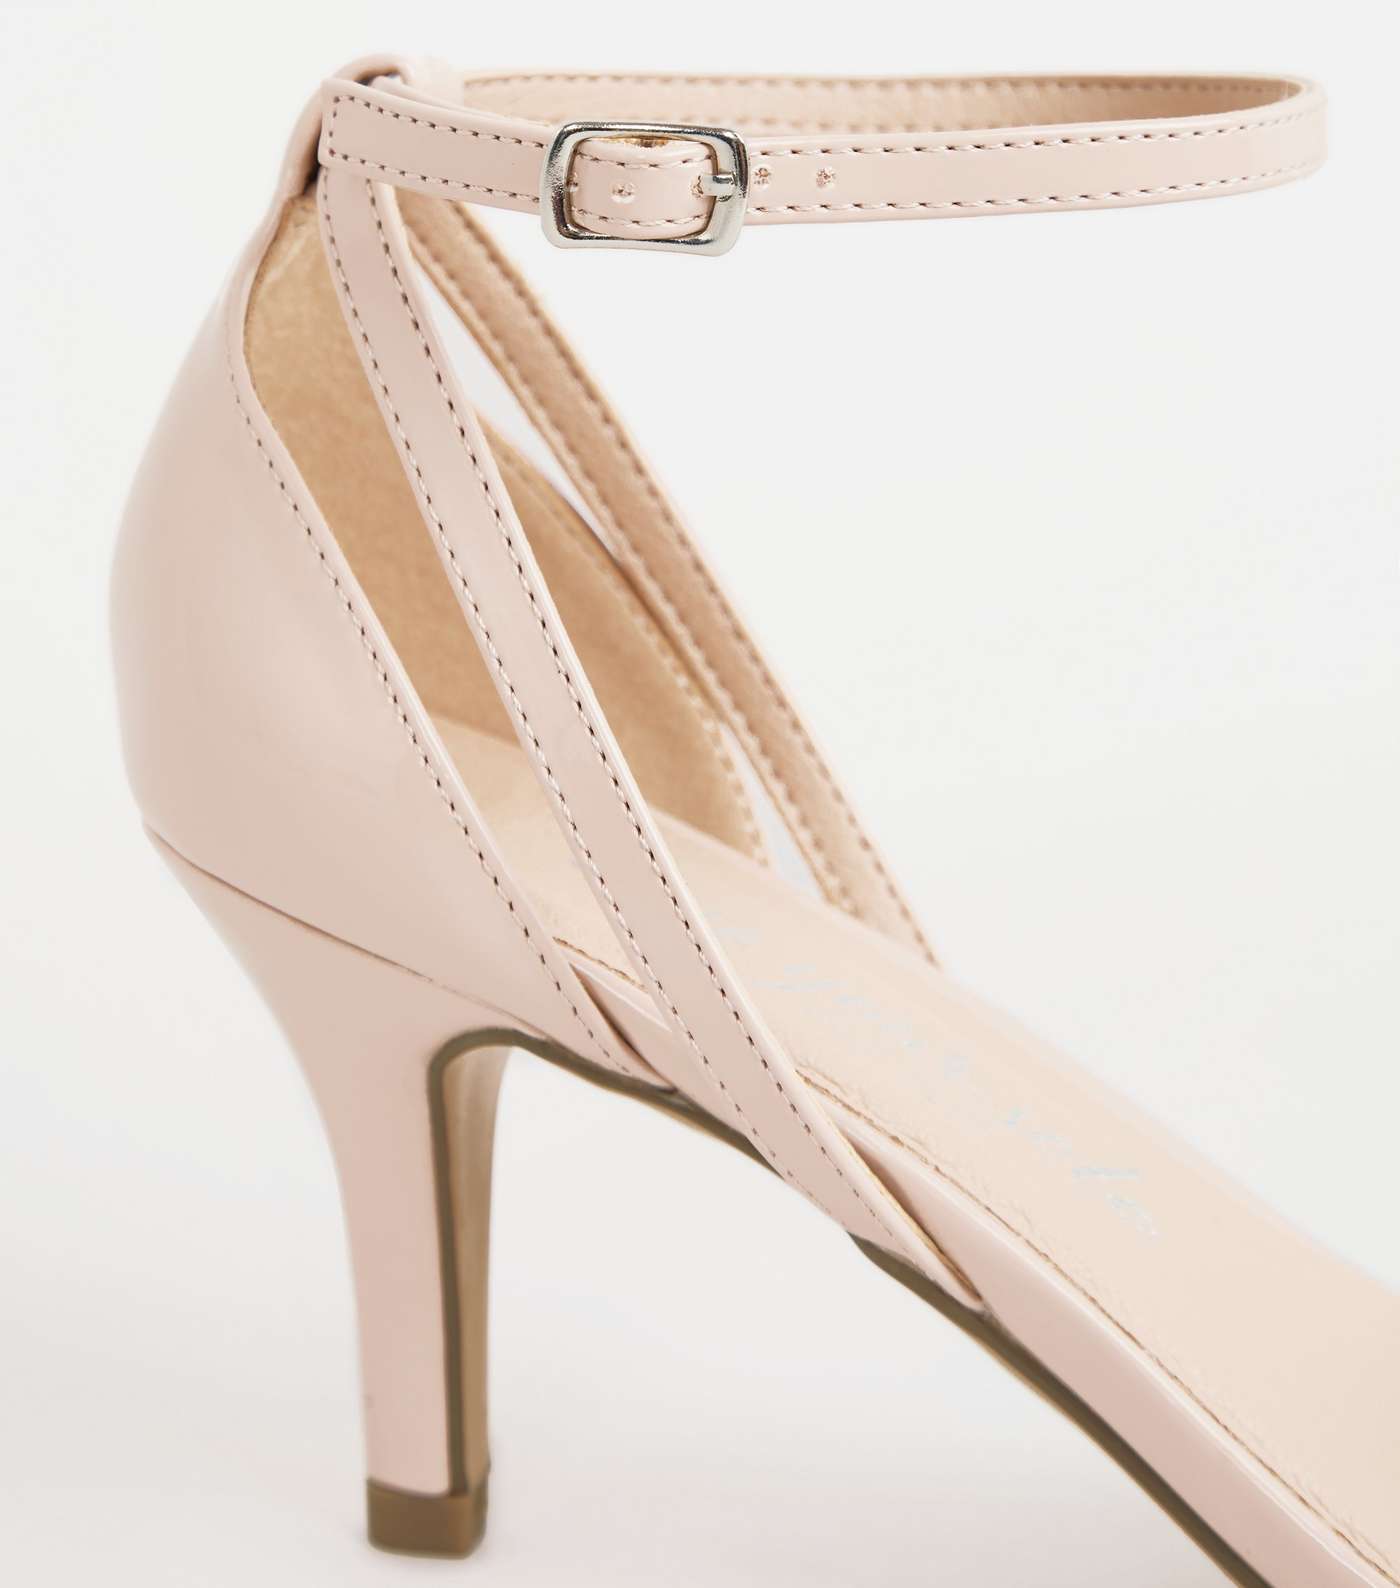 Wide Fit Pale Pink Patent Strappy Stiletto Heels Image 3